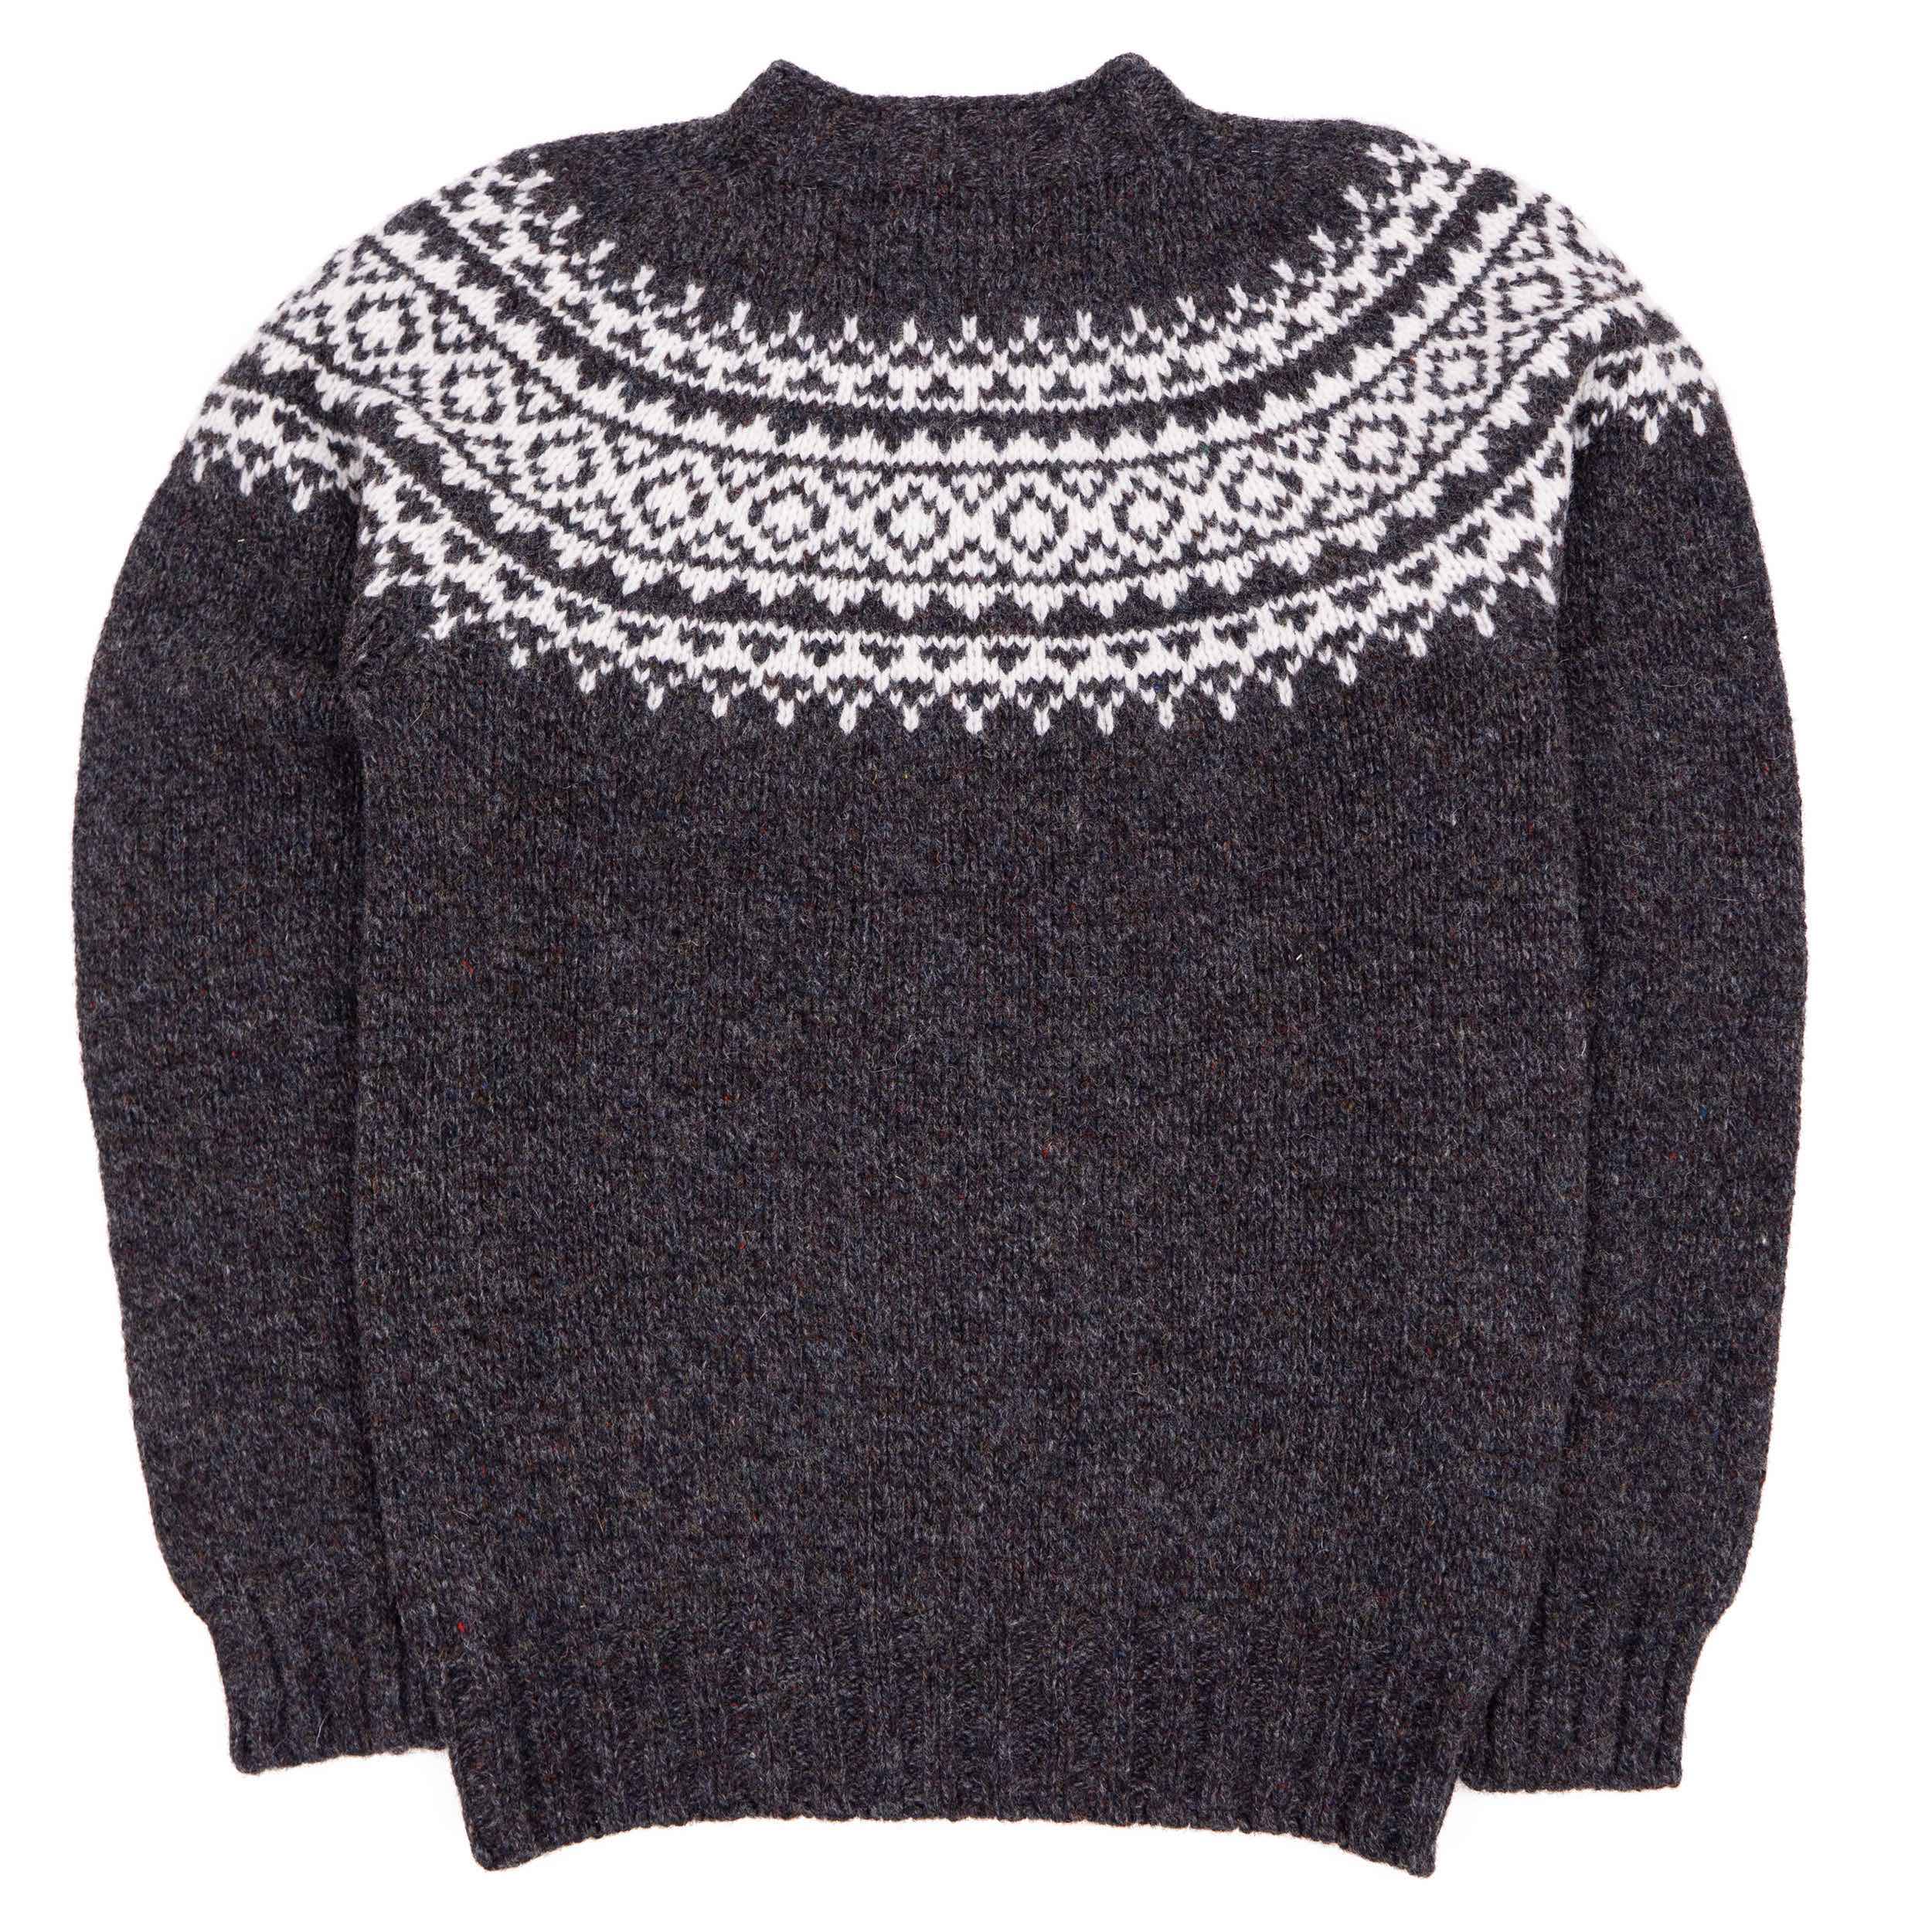 Carrier Company Heavy Yoke Crew Neck Sweater in Rock and Snow